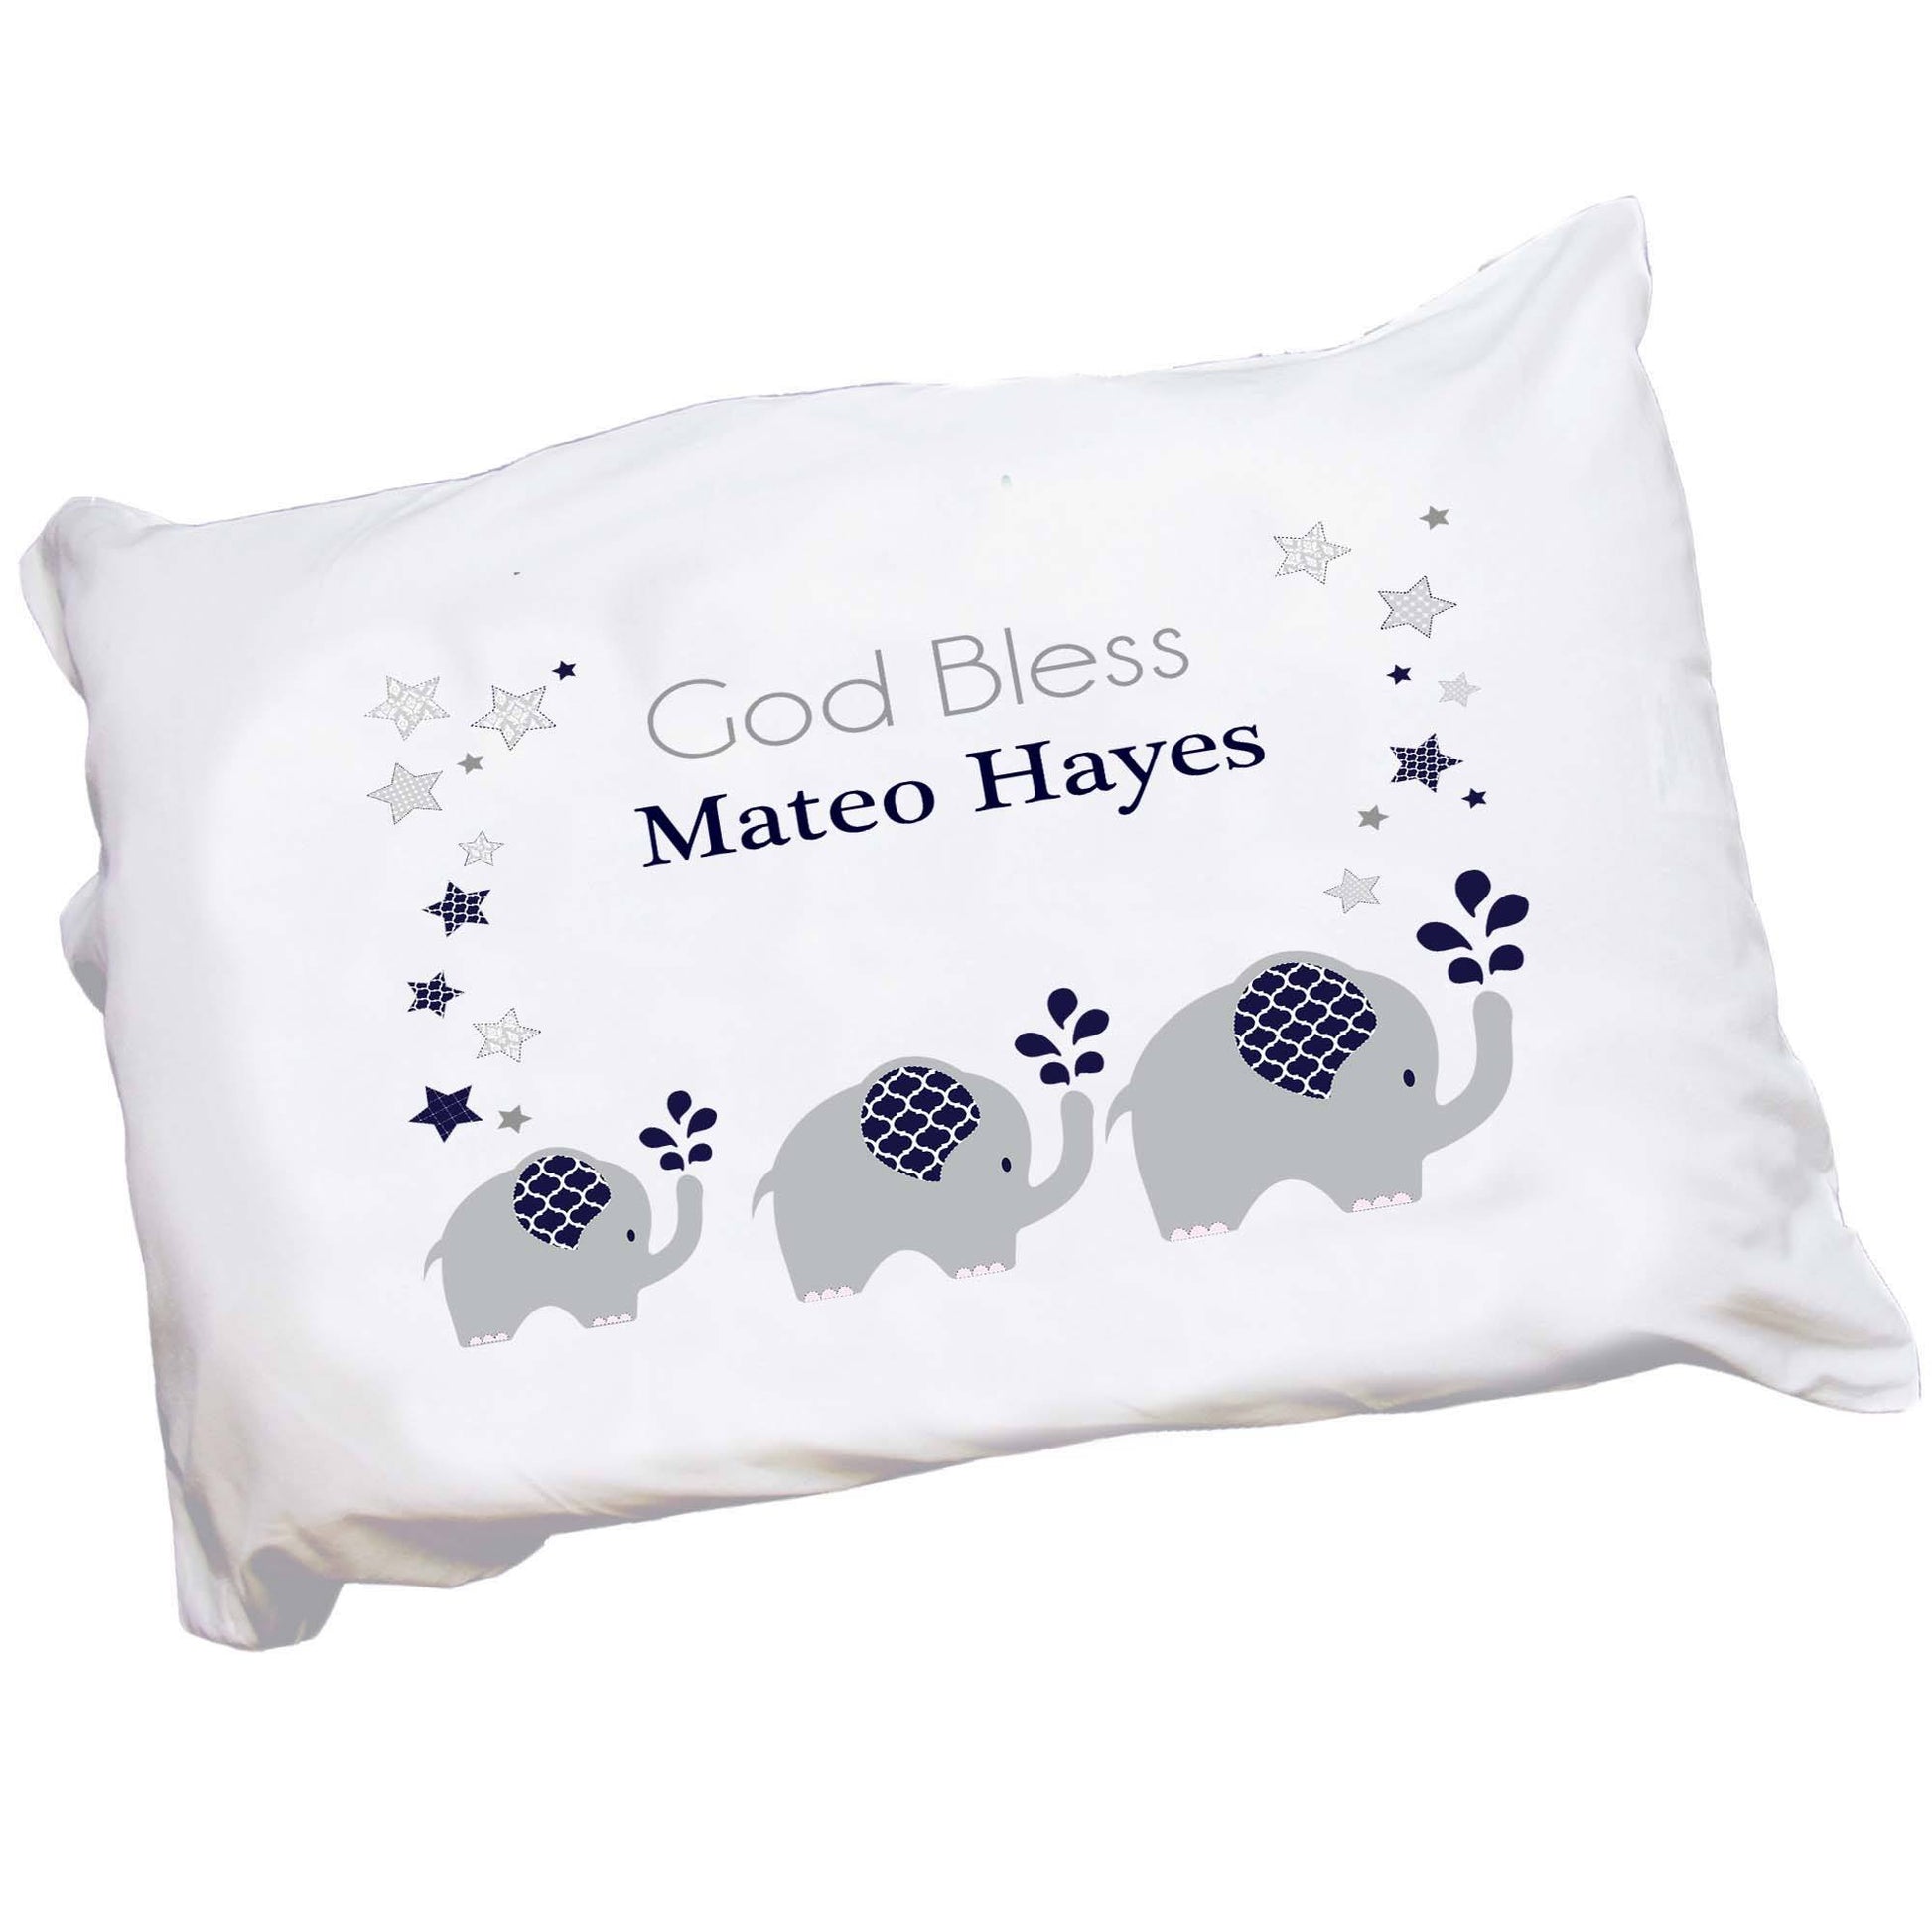 Childs Personalized navy blue and gray elephant pillowcase